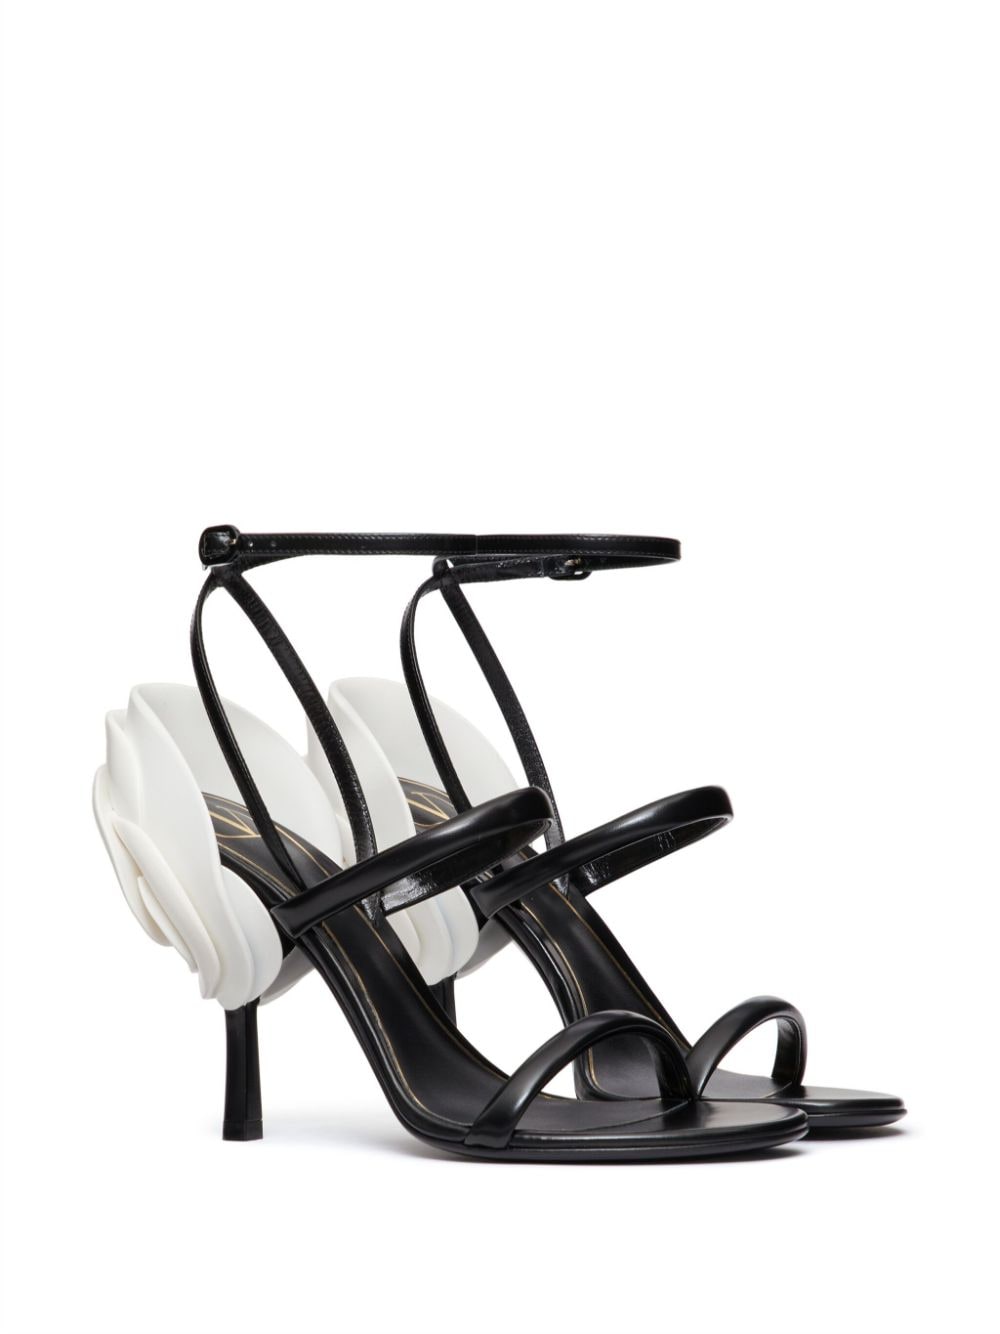 Shop Valentino Roserouche 1959 100mm Leather Sandals In Black